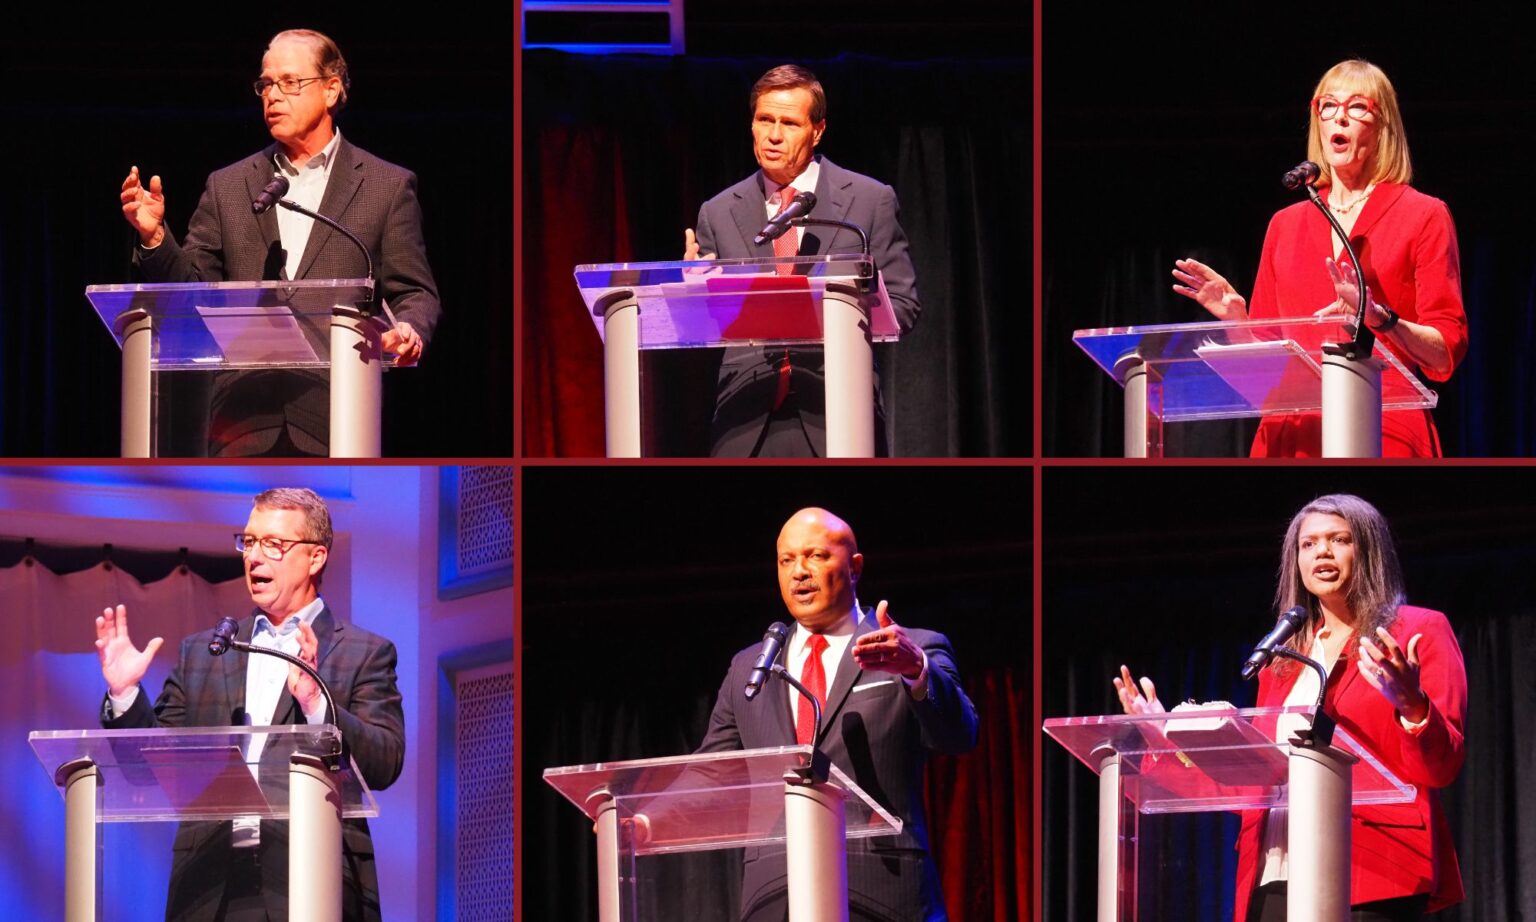 The six GOP gubernatorial hopefuls participate in a March 11 debate in Carmel. Clockwise from left: U.S. Sen. Mike Braun, Brad Chambers, Lt. Gov. Suzanne Crouch, Jamie Reitenour, former Attorney General Curtis Hill and Eric Doden. (Whitney Downard/Indiana Capital Chronicle)